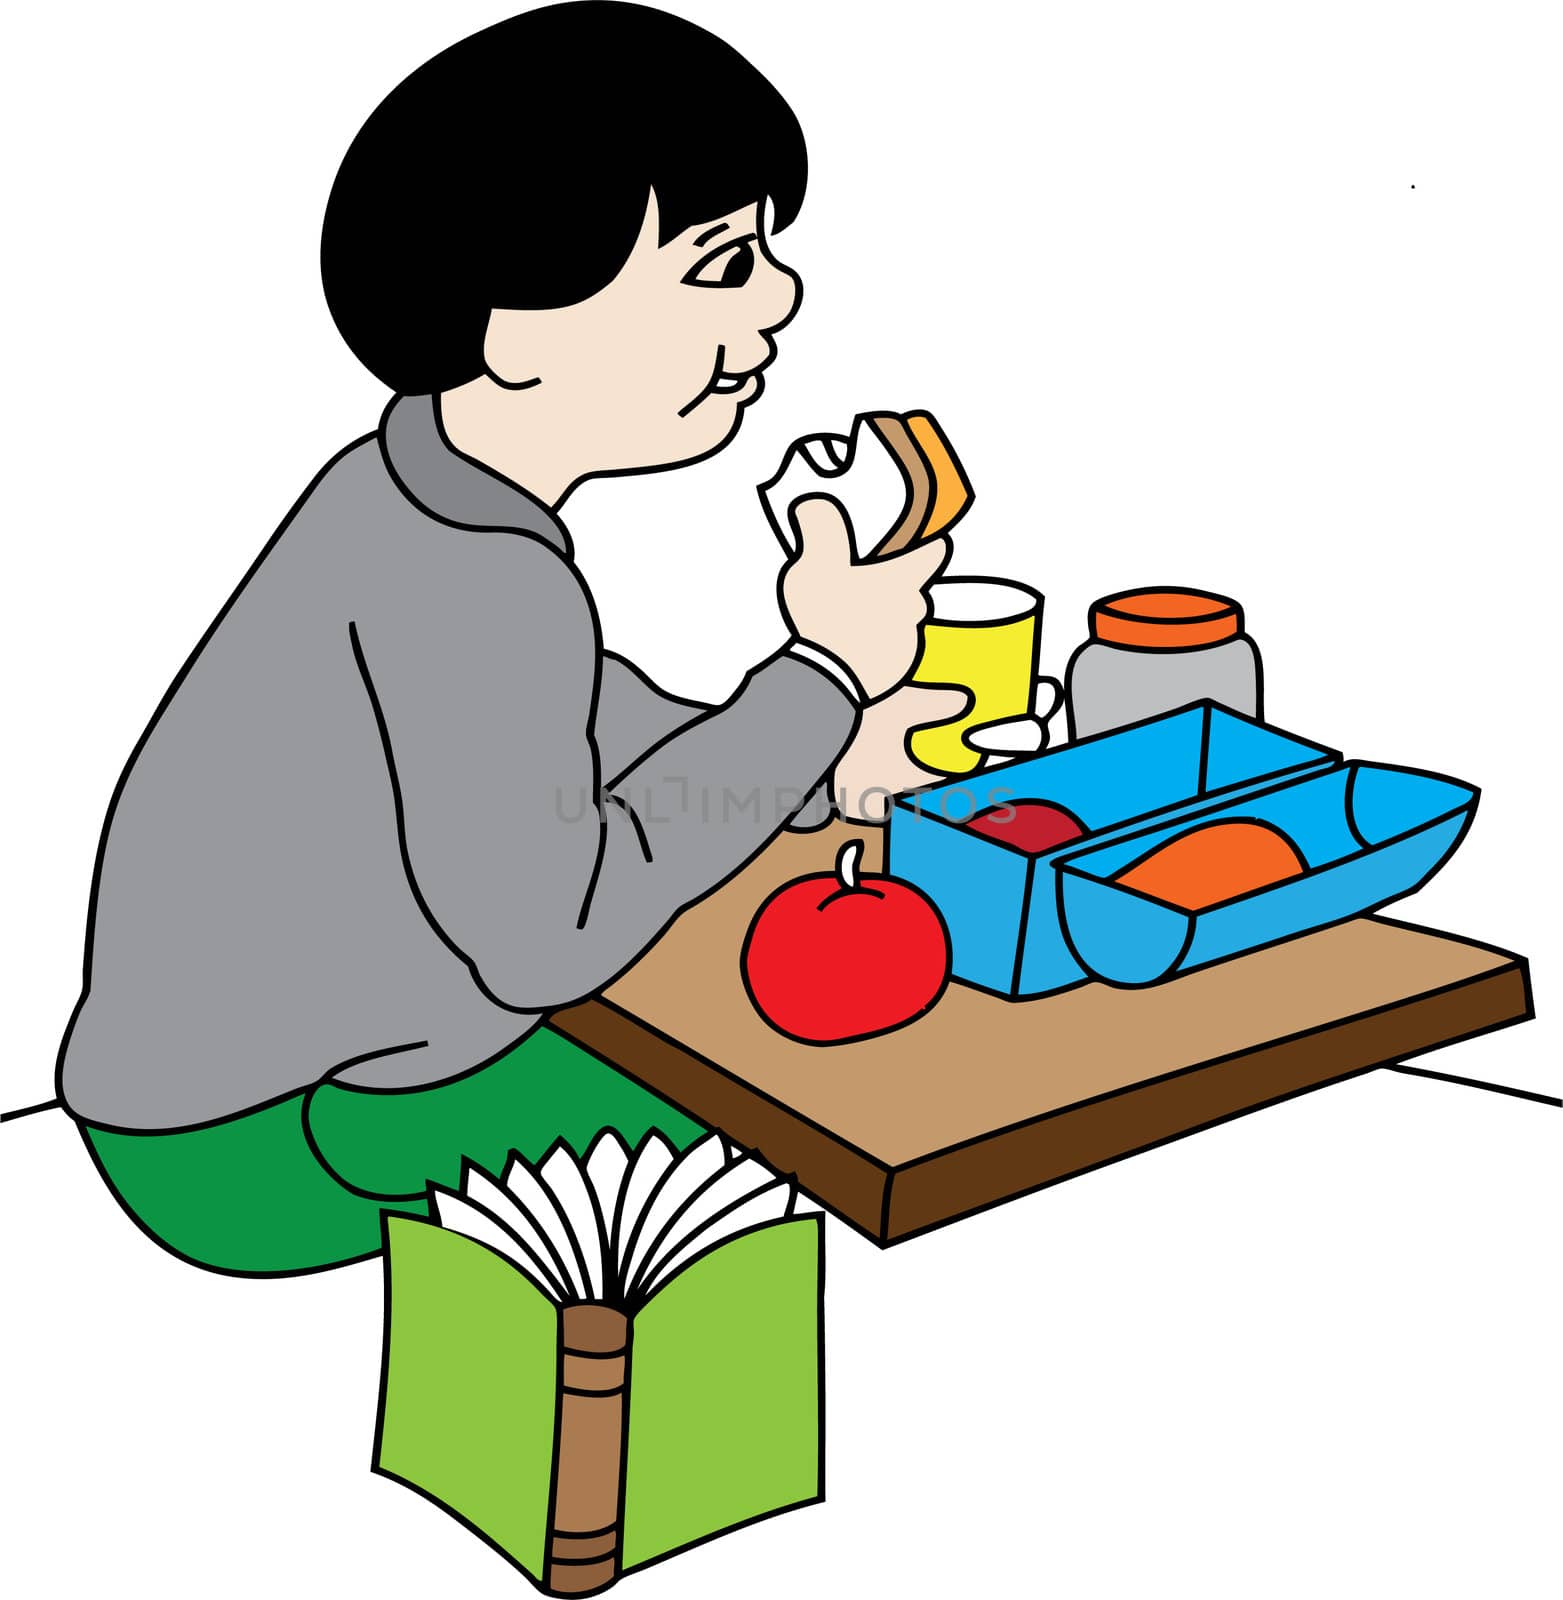 Boy eating at lunch by nadil